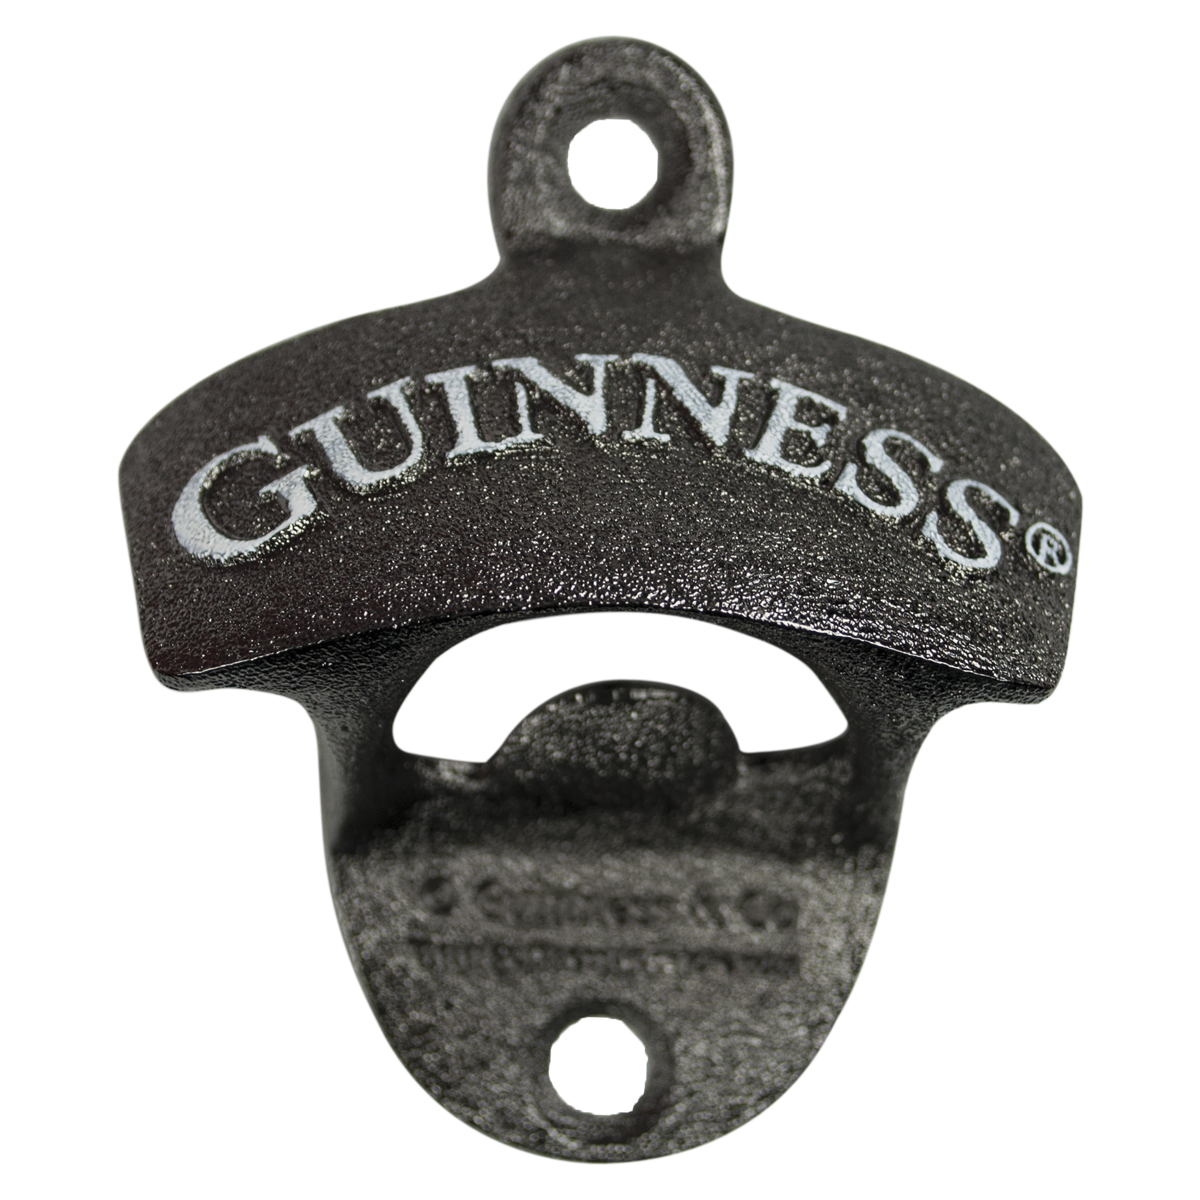 The perfect gift for Guinness lovers, this wall mounted Guinness Wall Mounted Bottle Opener Boxed is a must-have accessory.